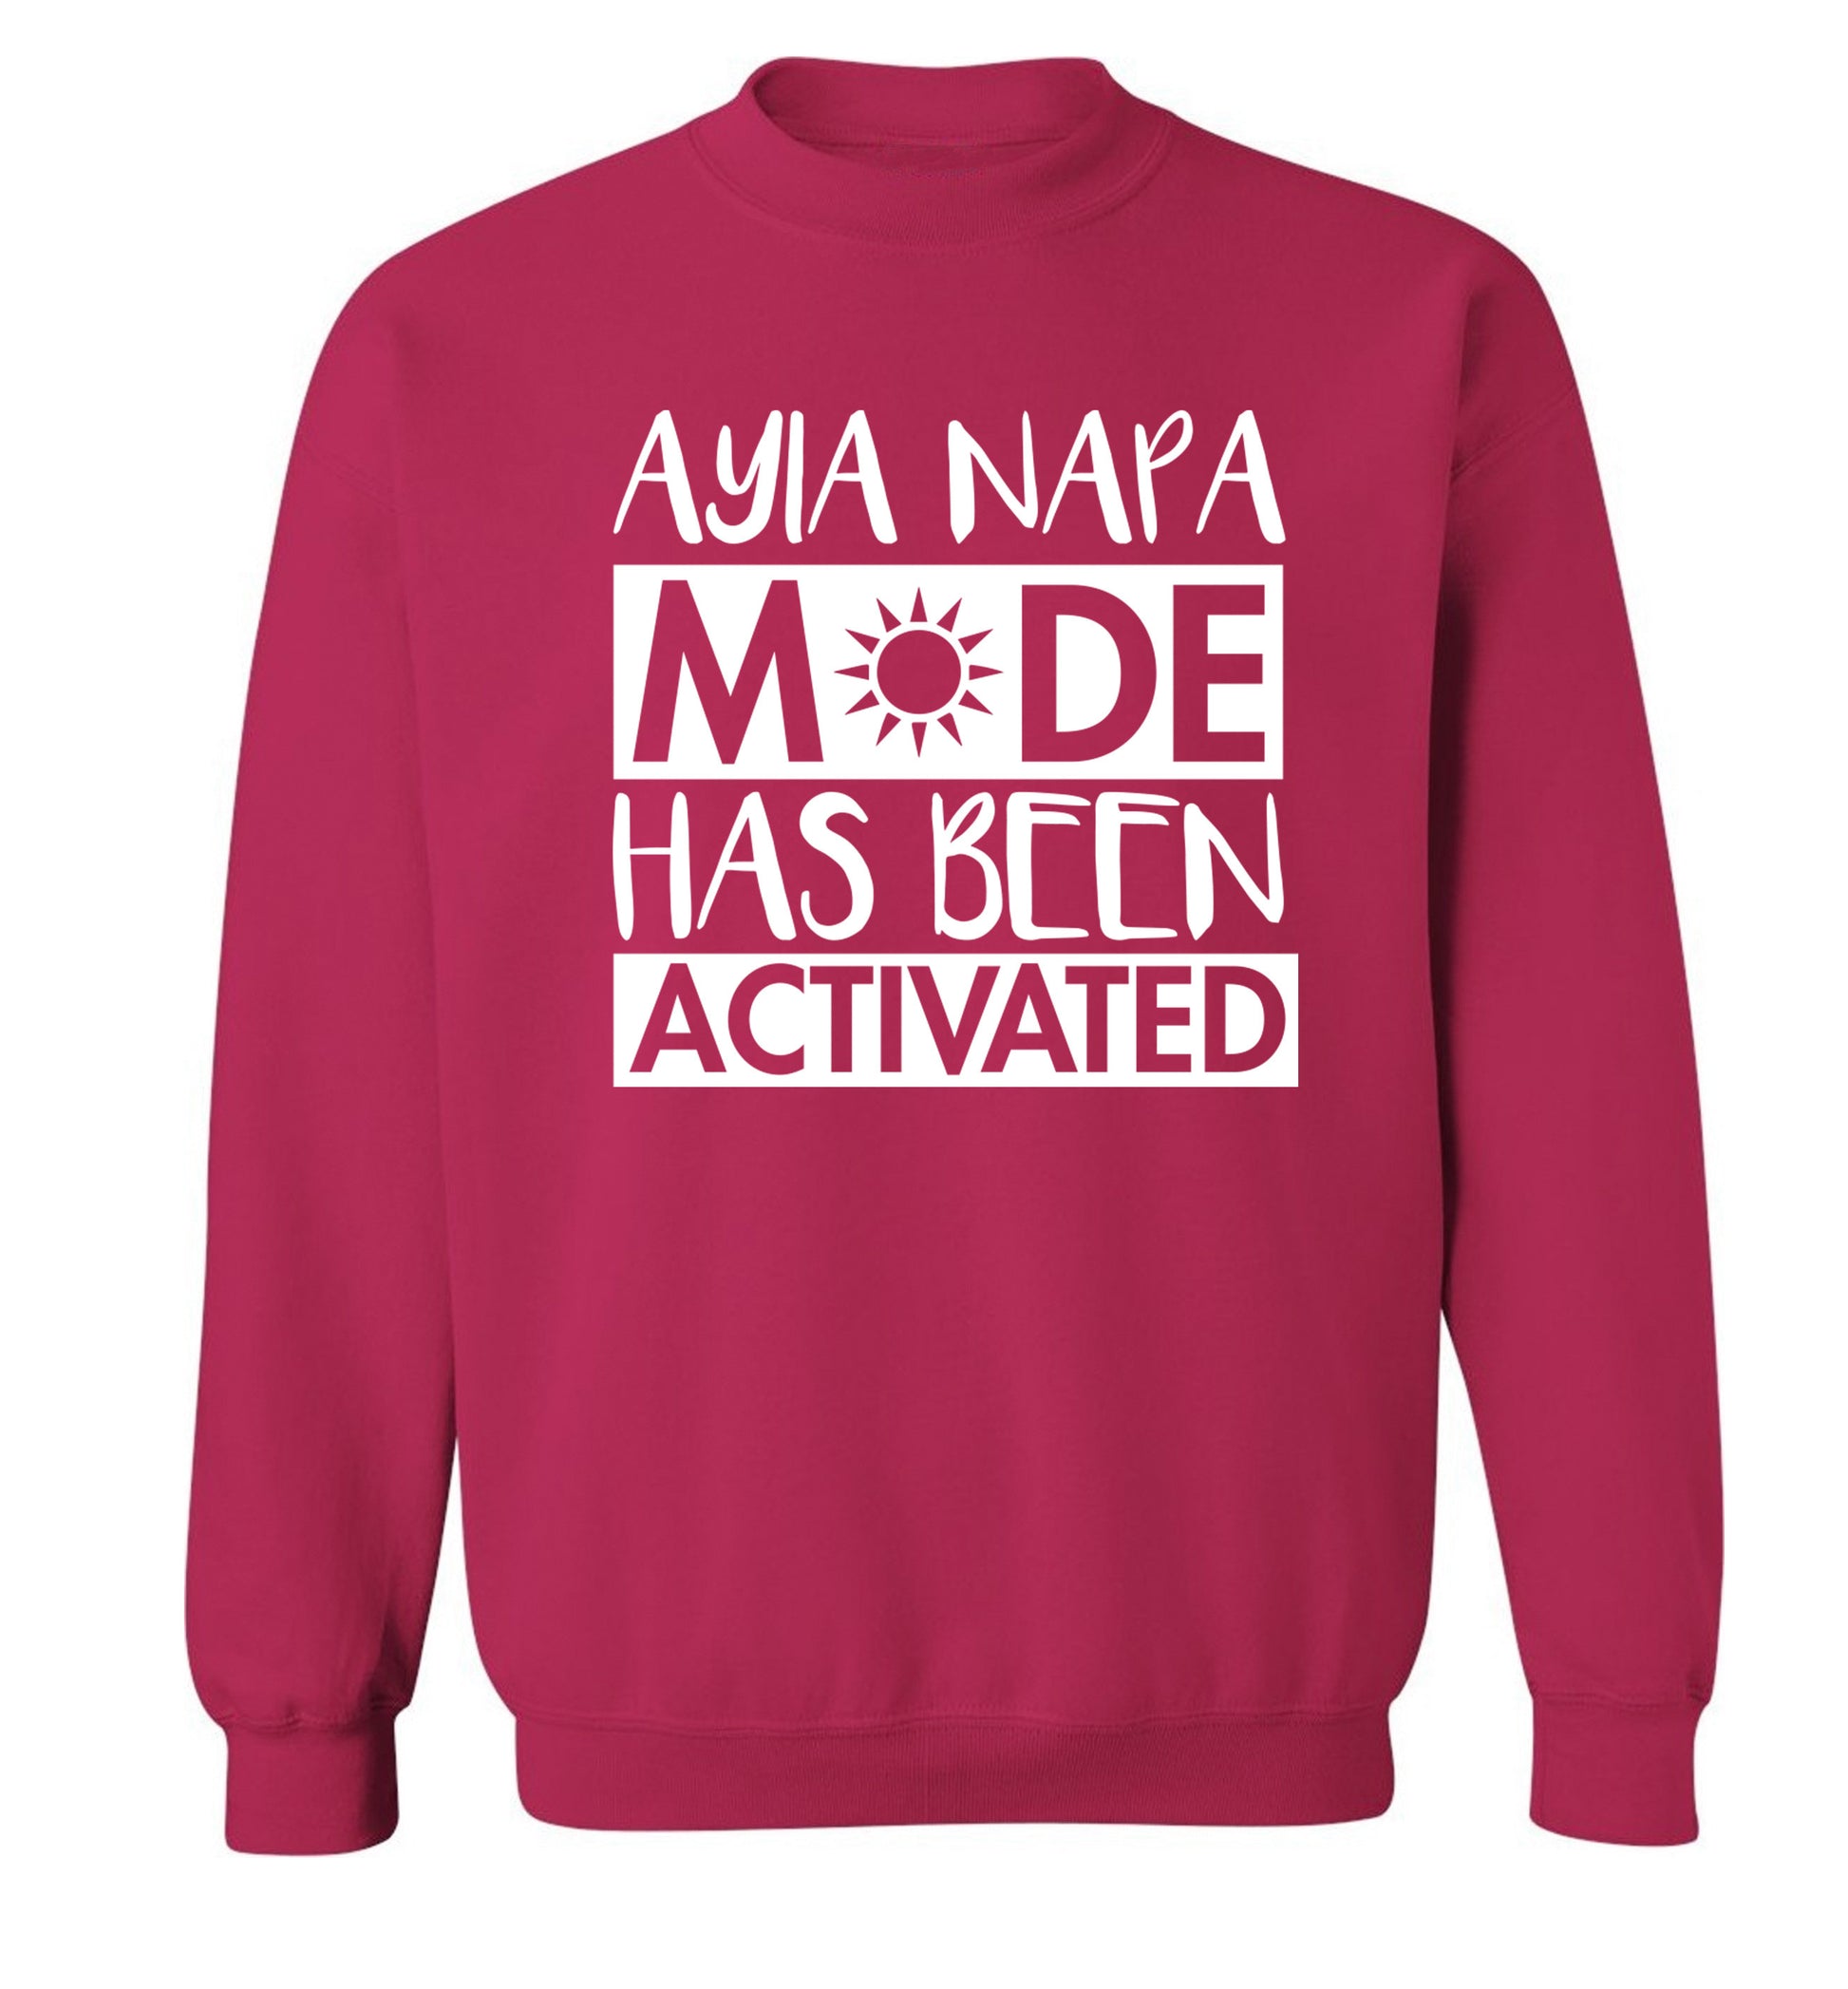 Aiya Napa mode has been activated Adult's unisex pink Sweater 2XL